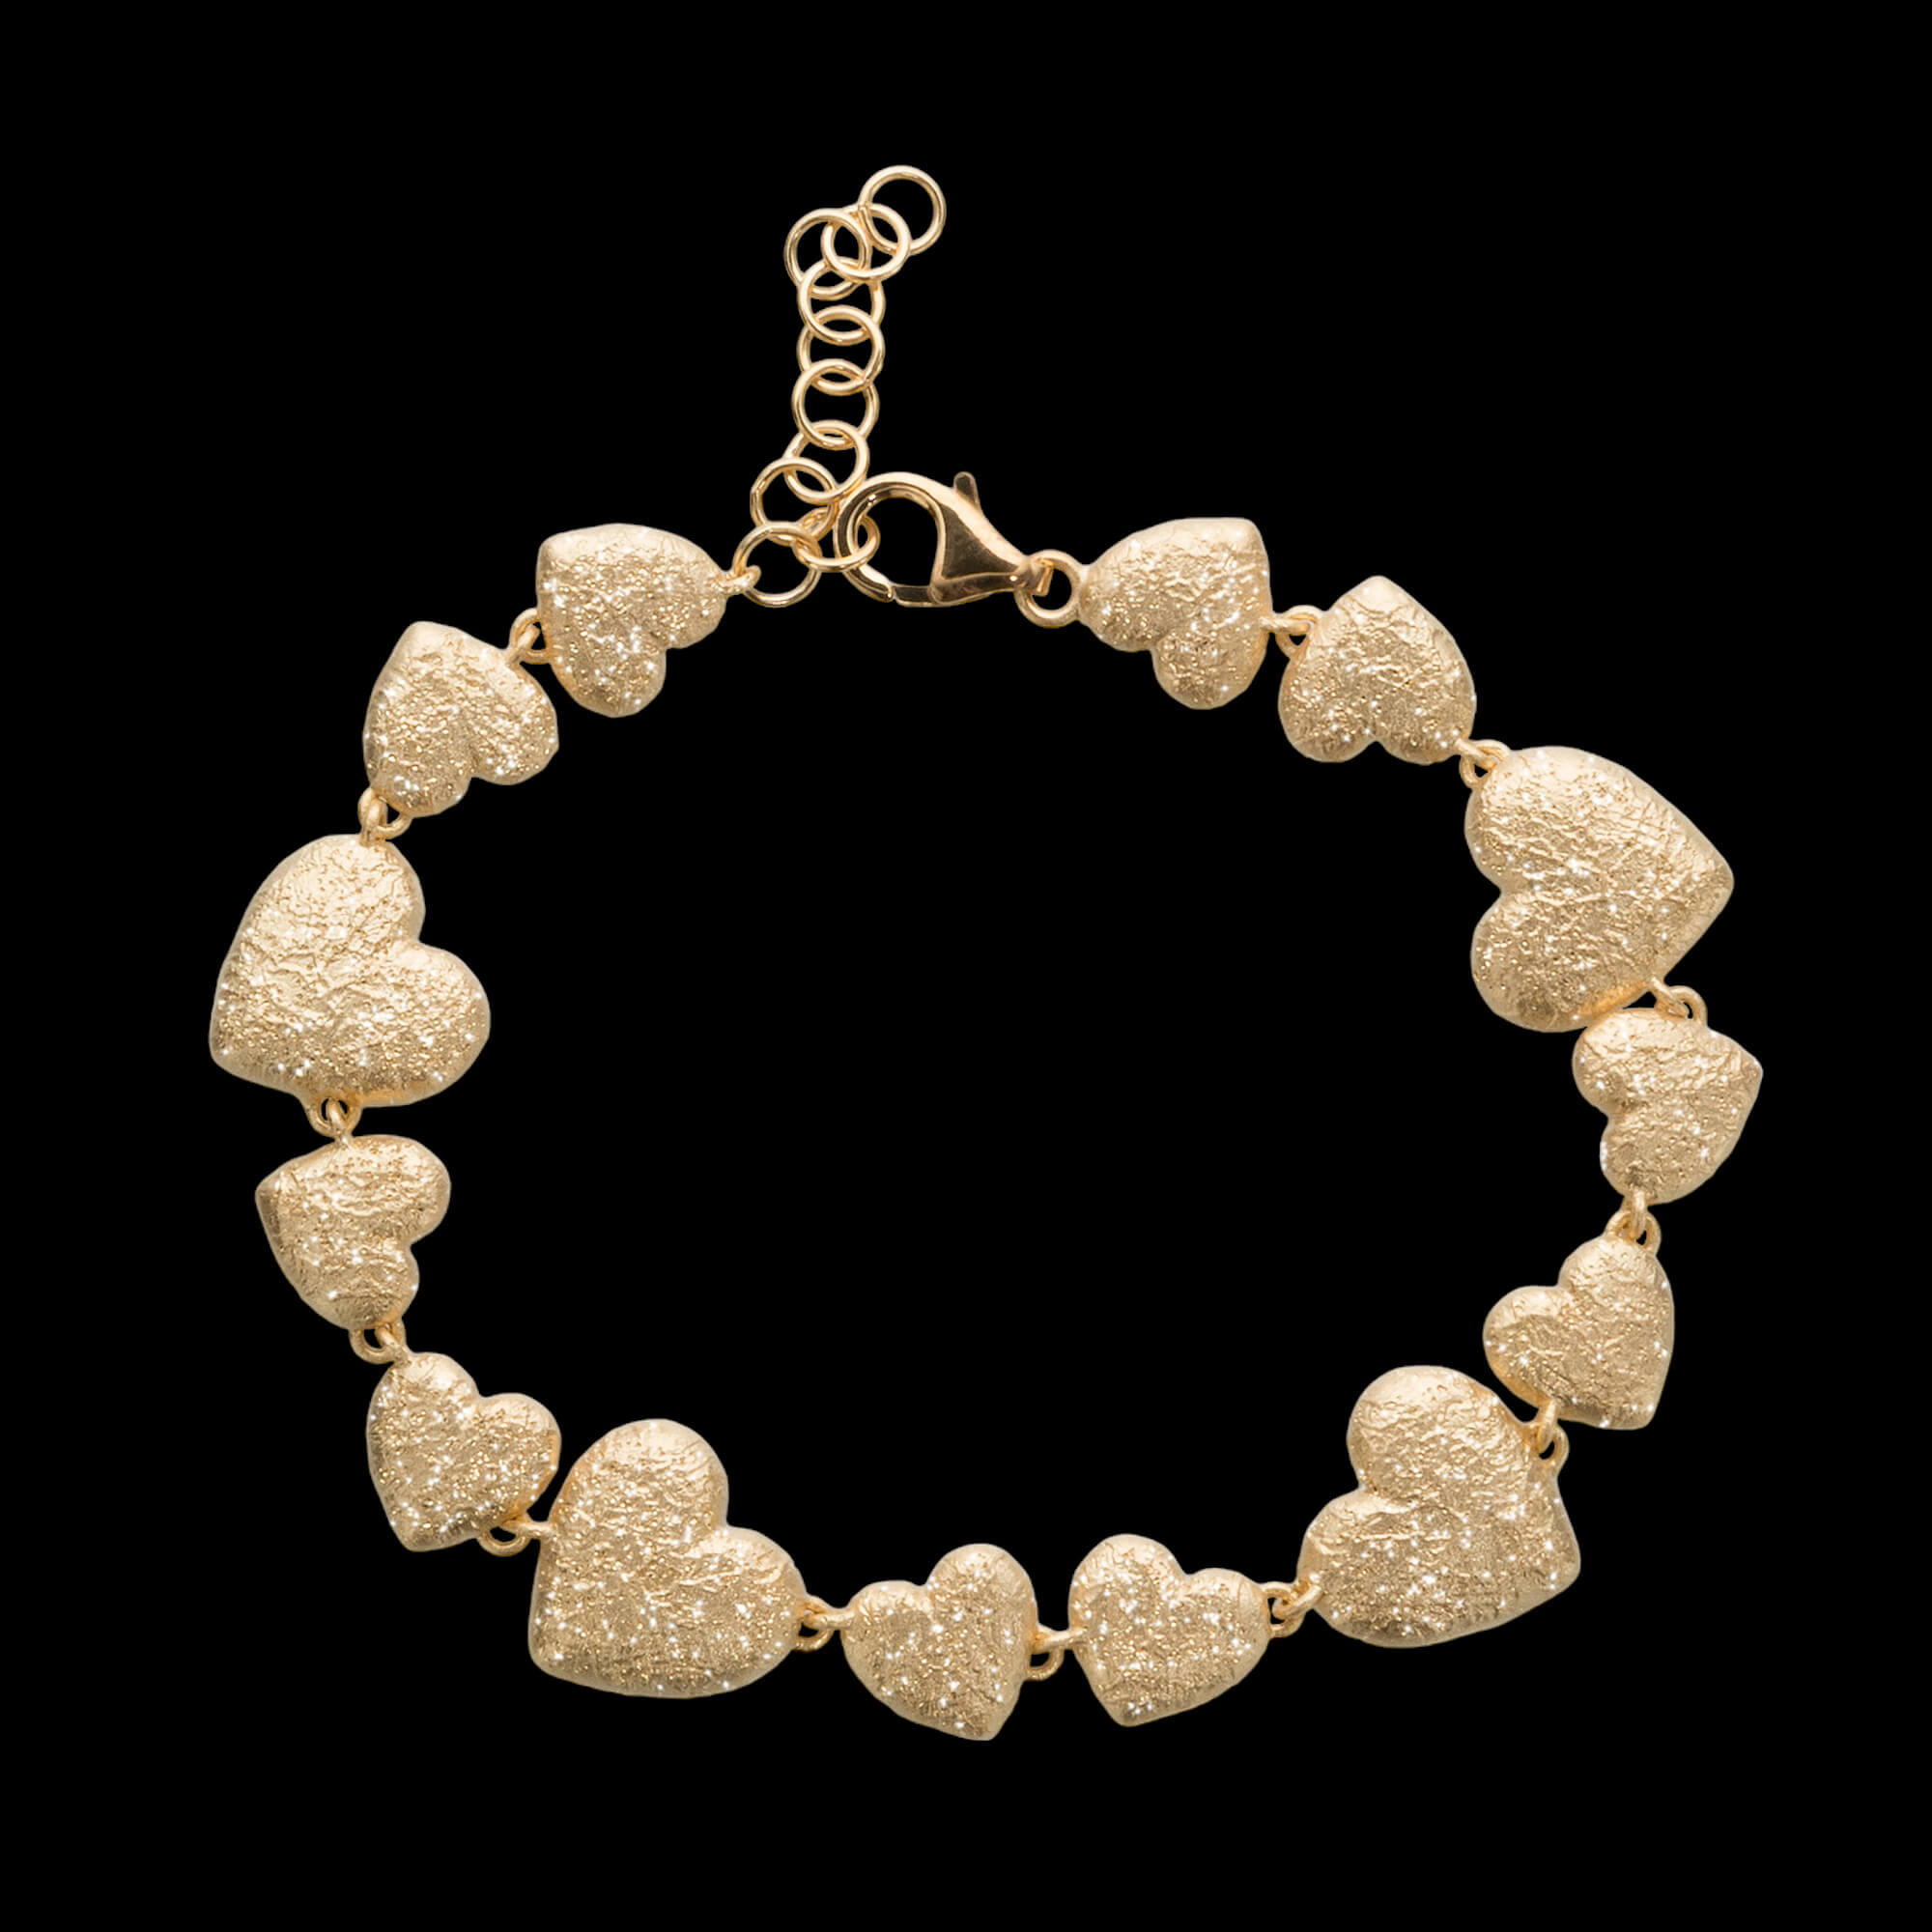 Gilded bracelet with multiple hearts